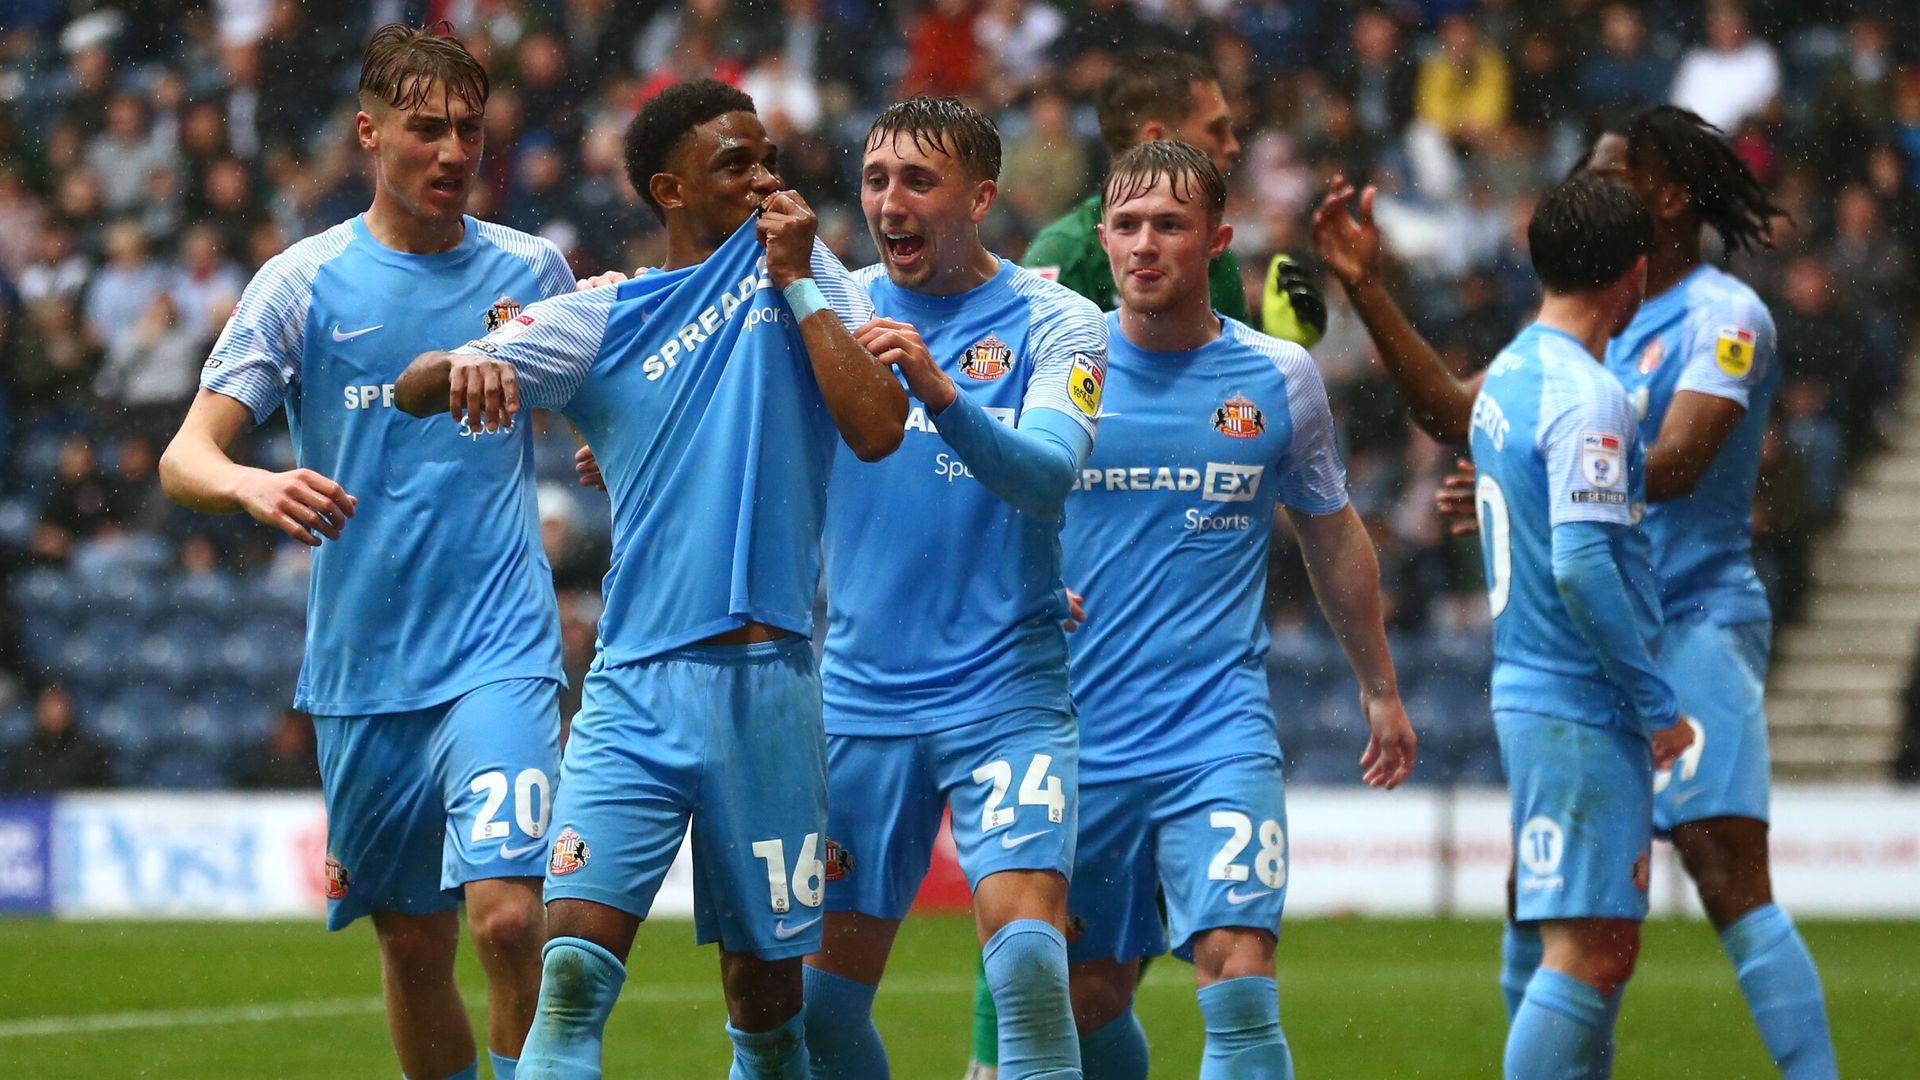 Championship goals, round-up: Sunderland, Coventry seal final play-off spots